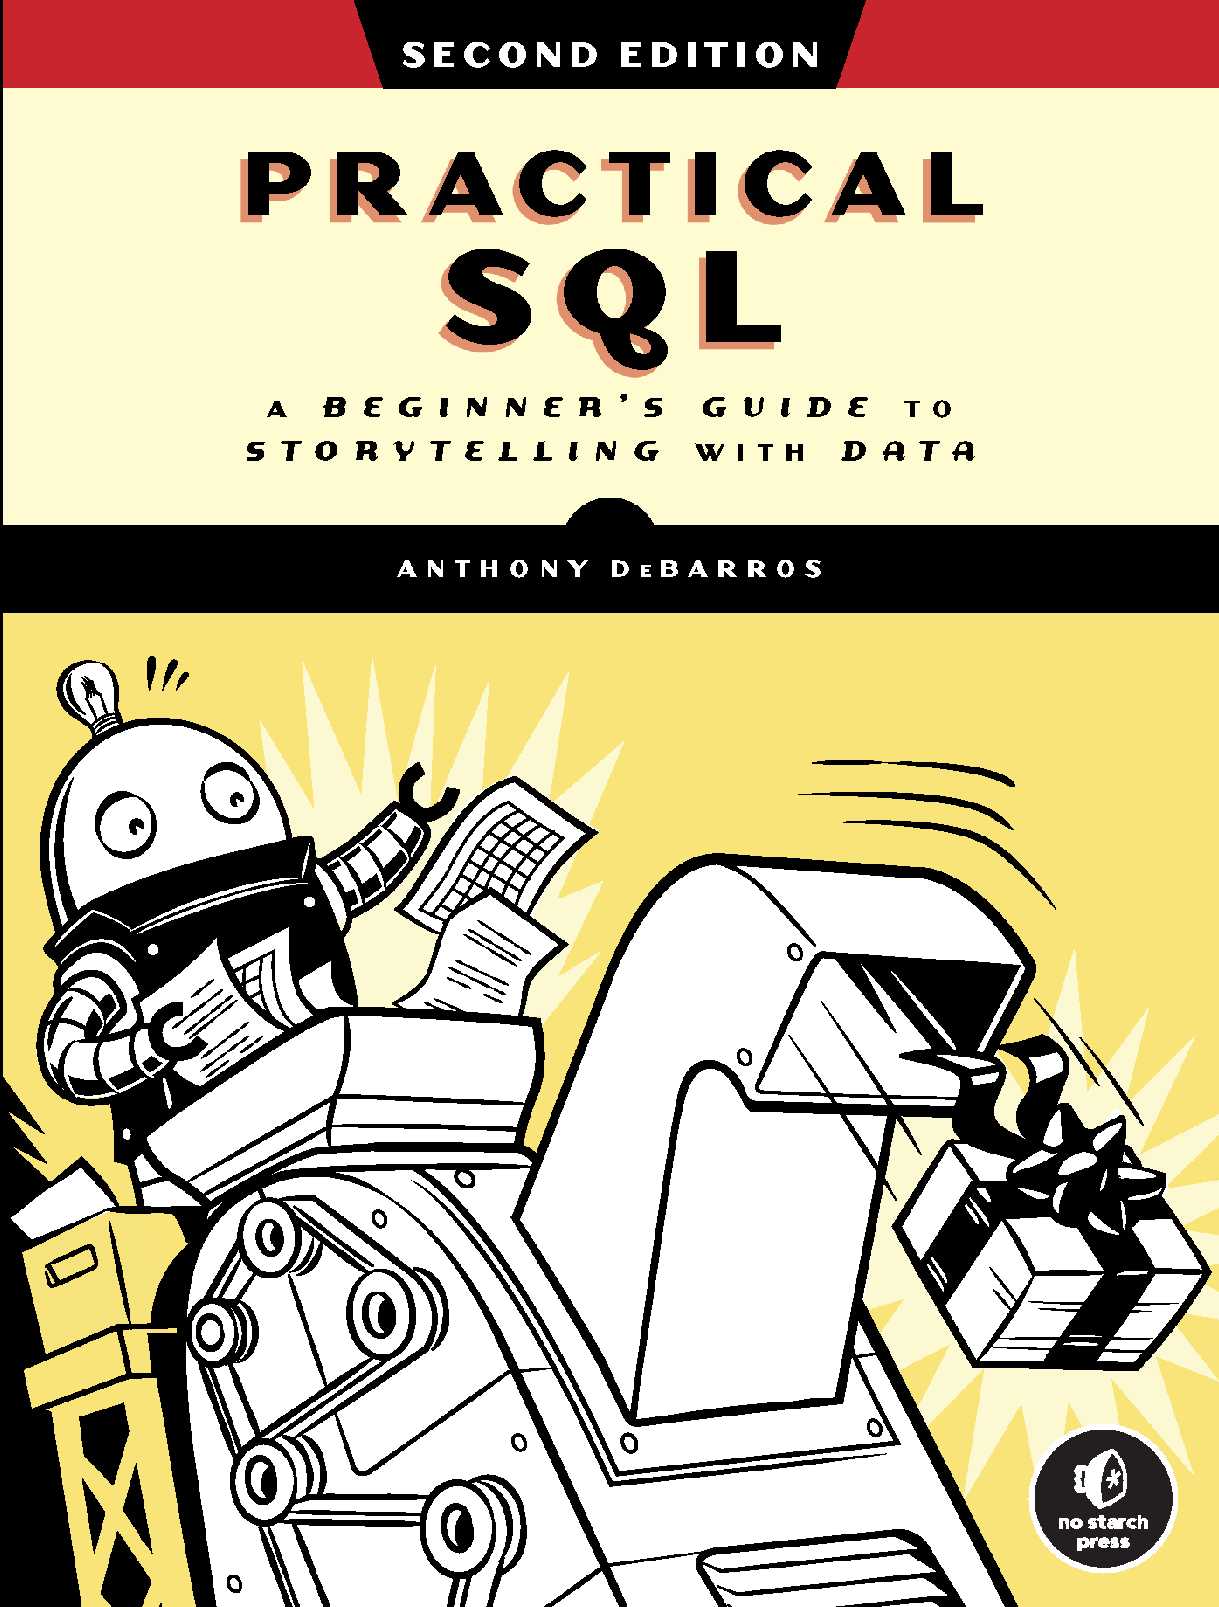 Practical SQL, 2nd Edition: A Beginner’s Guide to Storytelling with Data